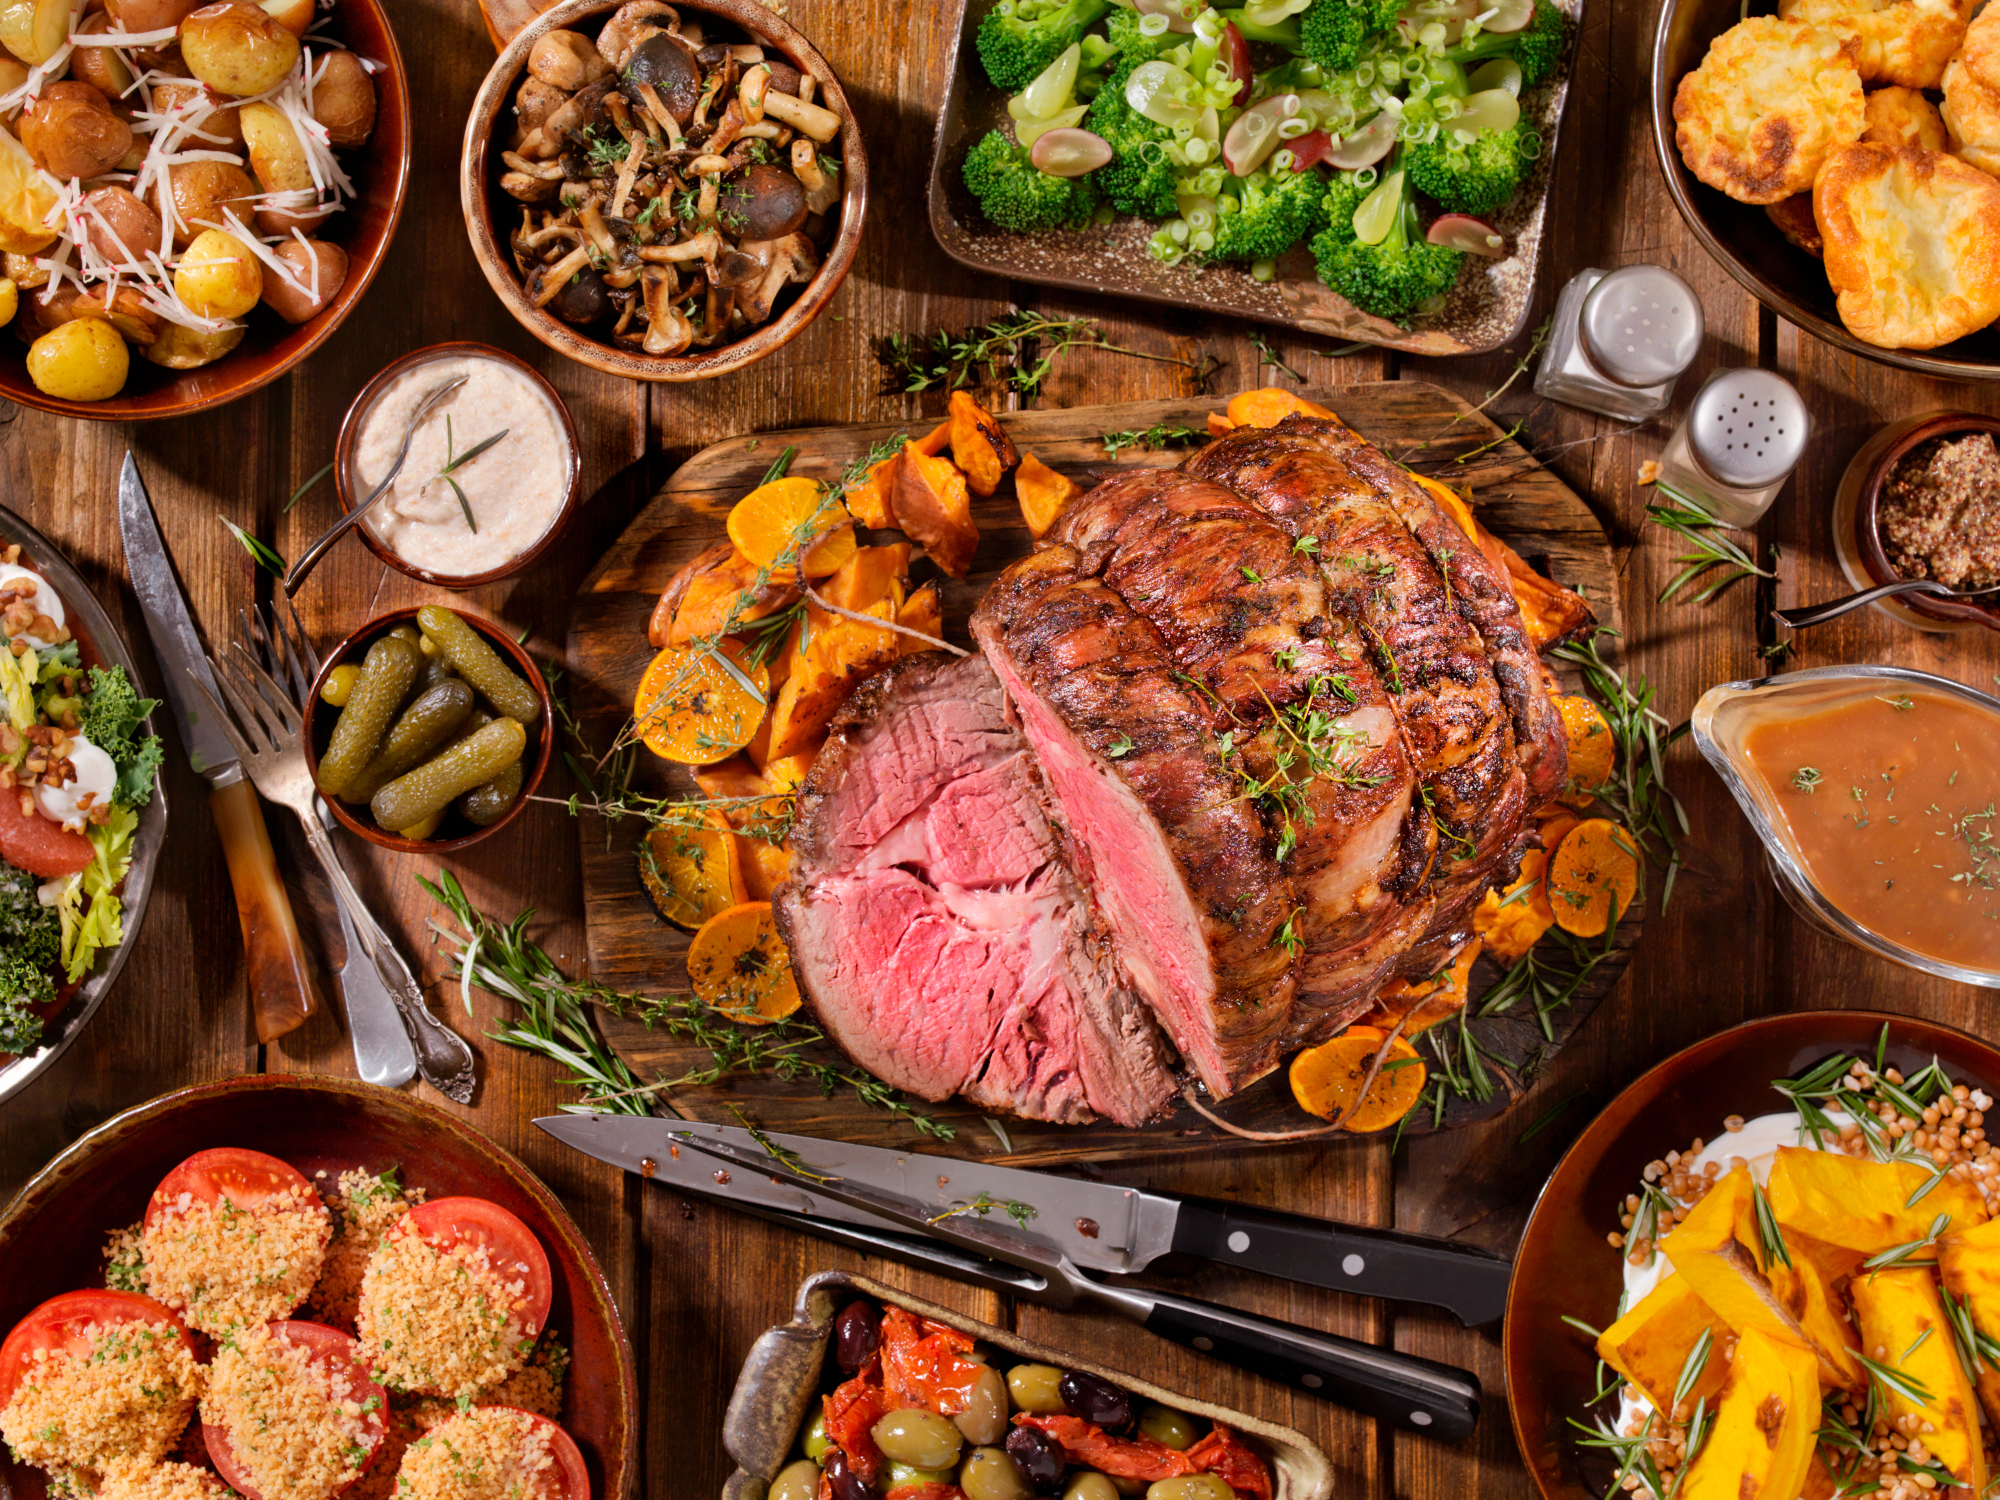 A roast beef dinner with complementary dishes served during the holidays.